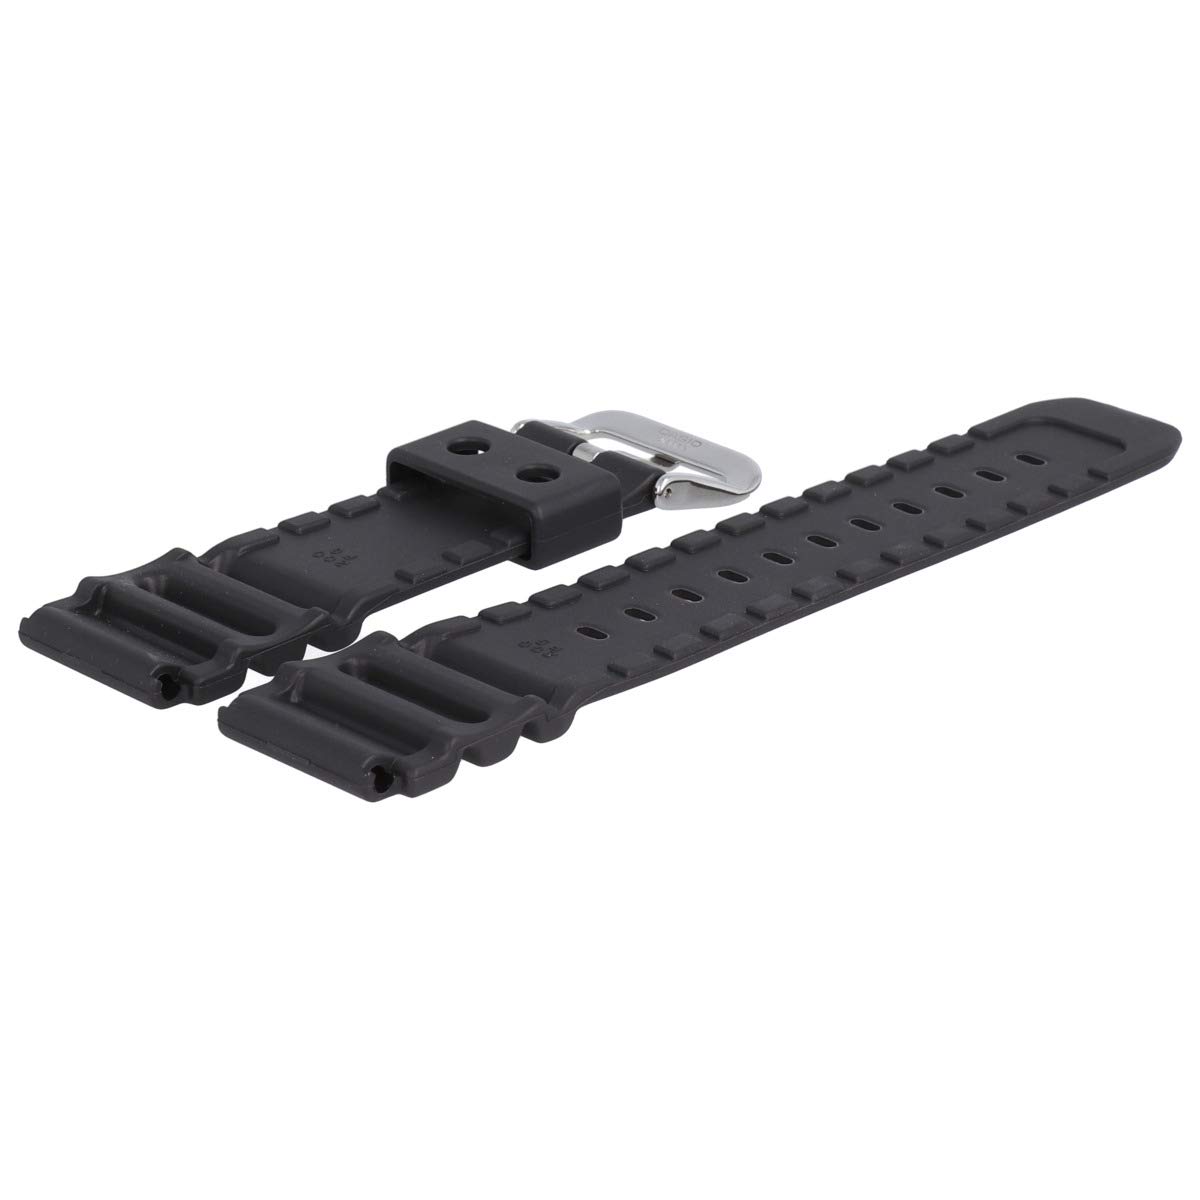 Casio Replacement Bands 70368314 – Strap, Black (22), Strip